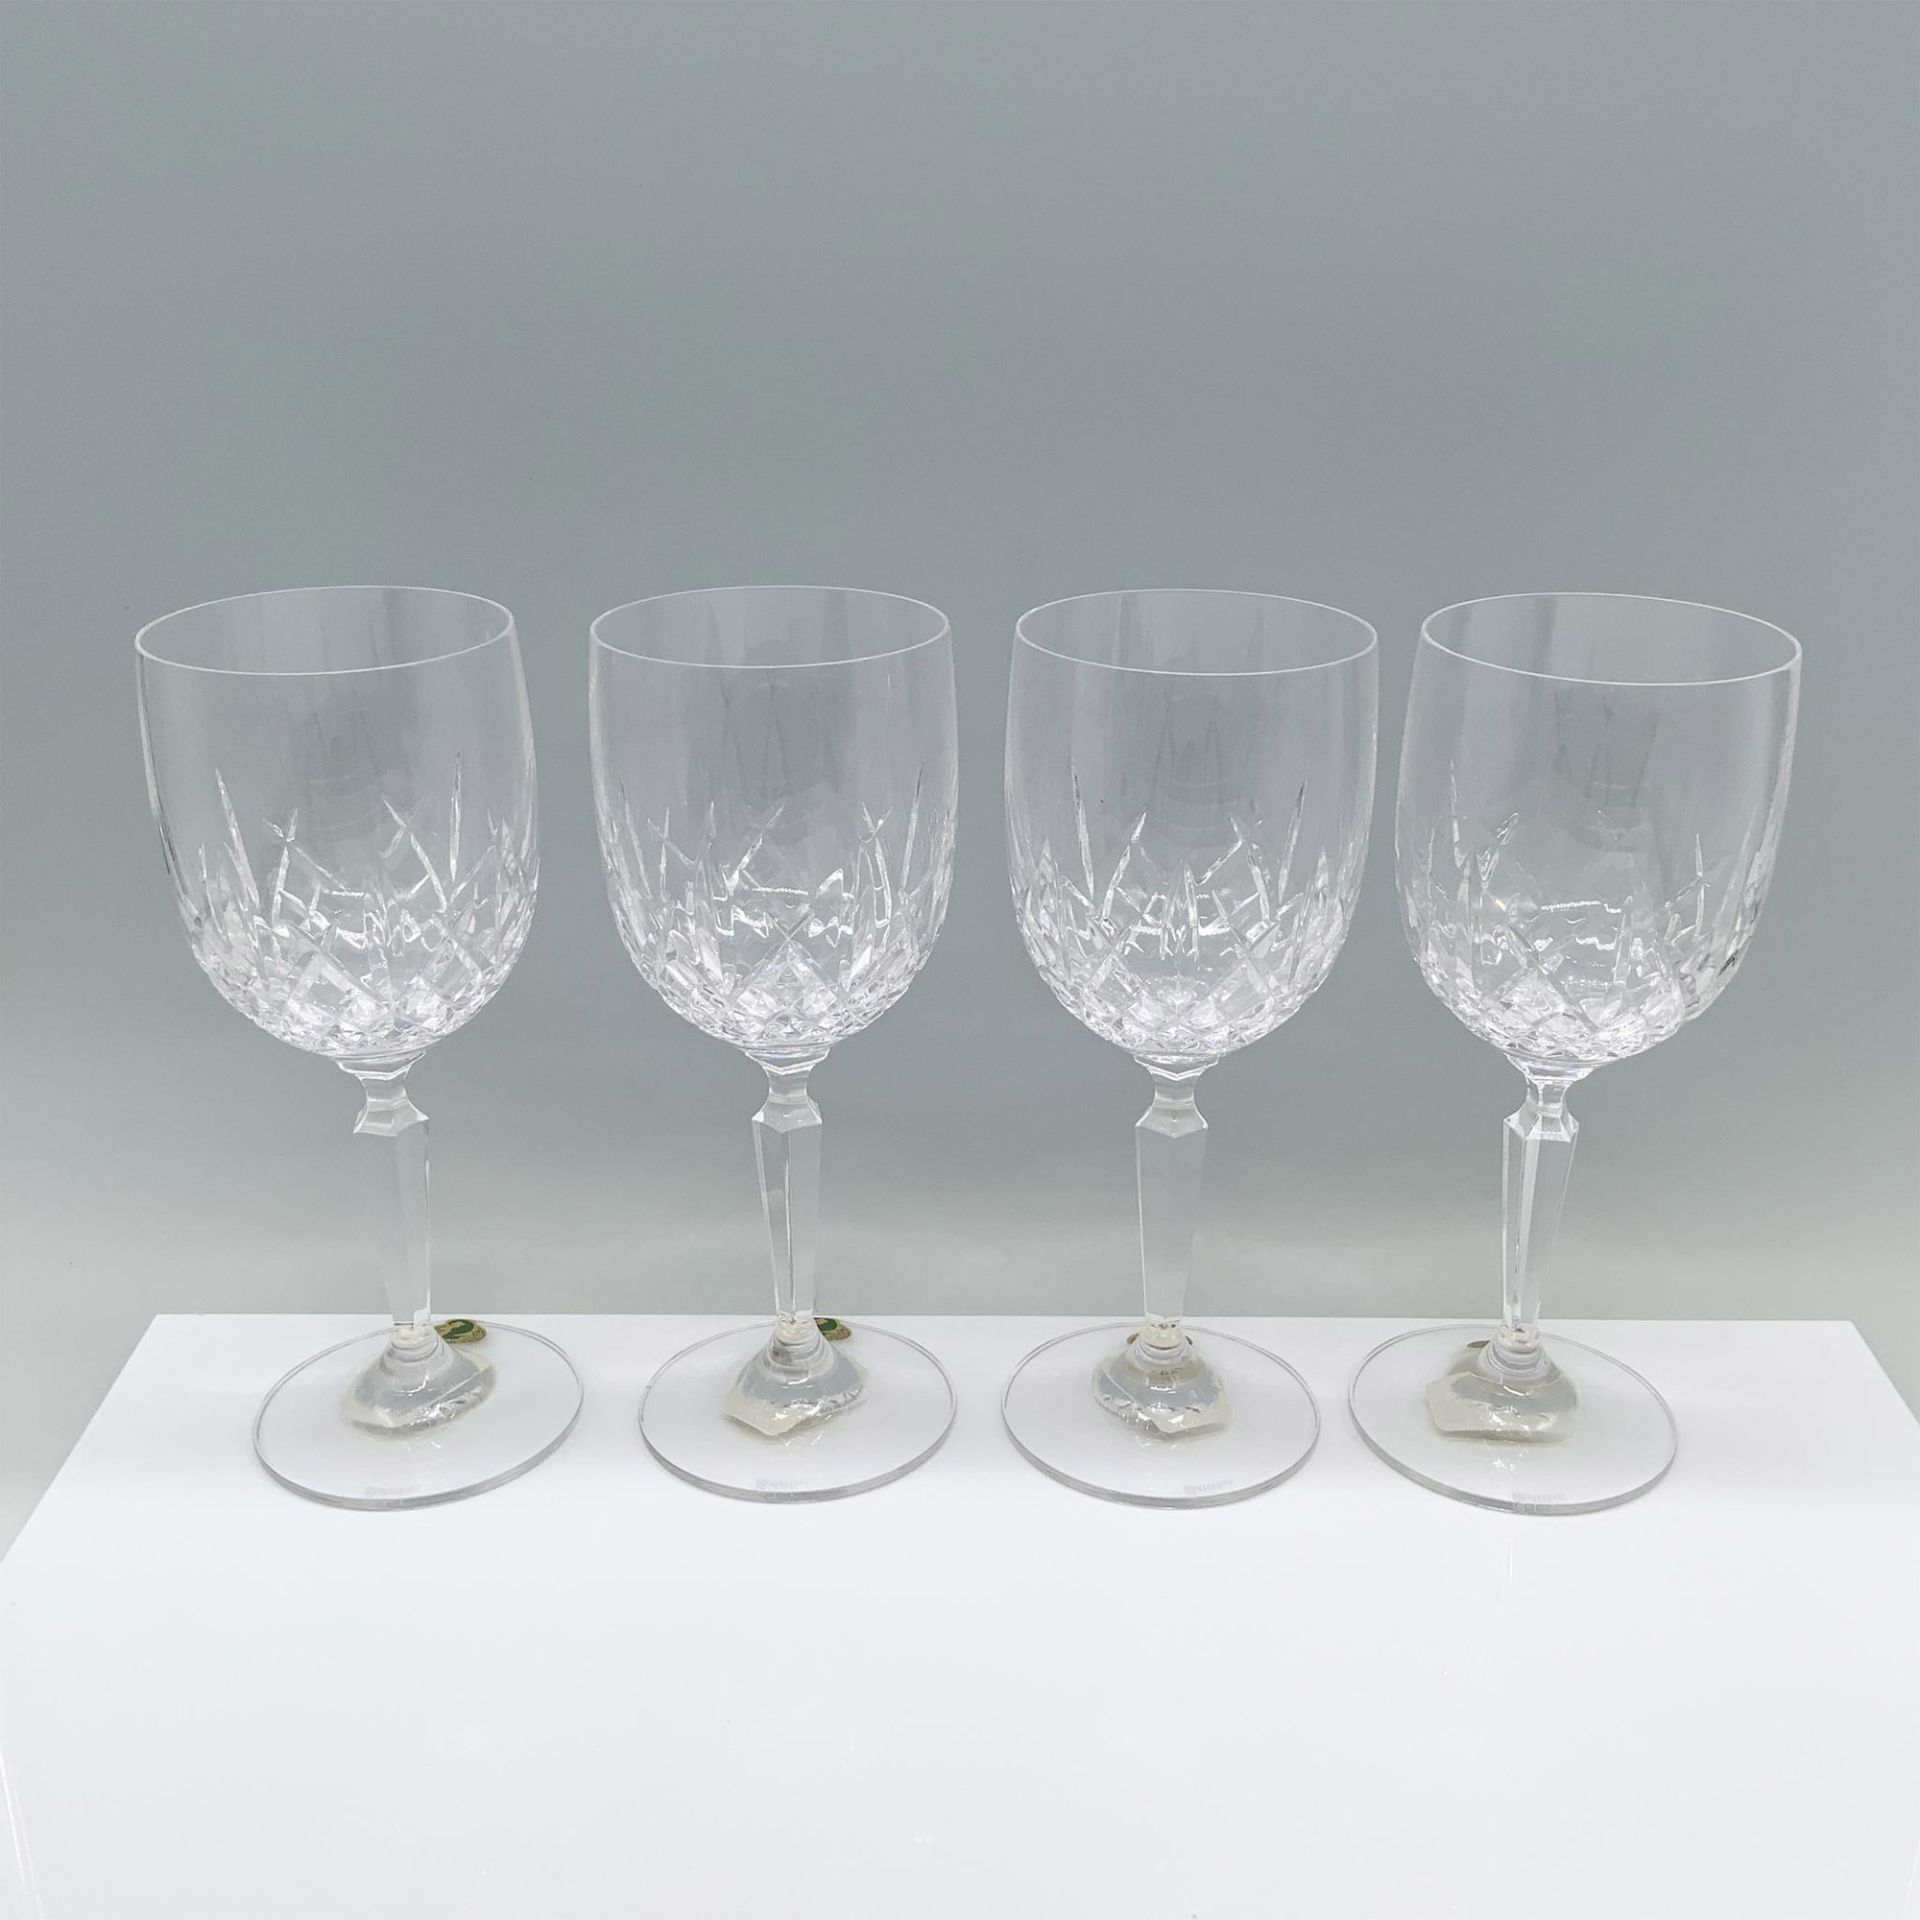 4pc Waterford Crystal Water Goblets, Newgrange - Image 2 of 4